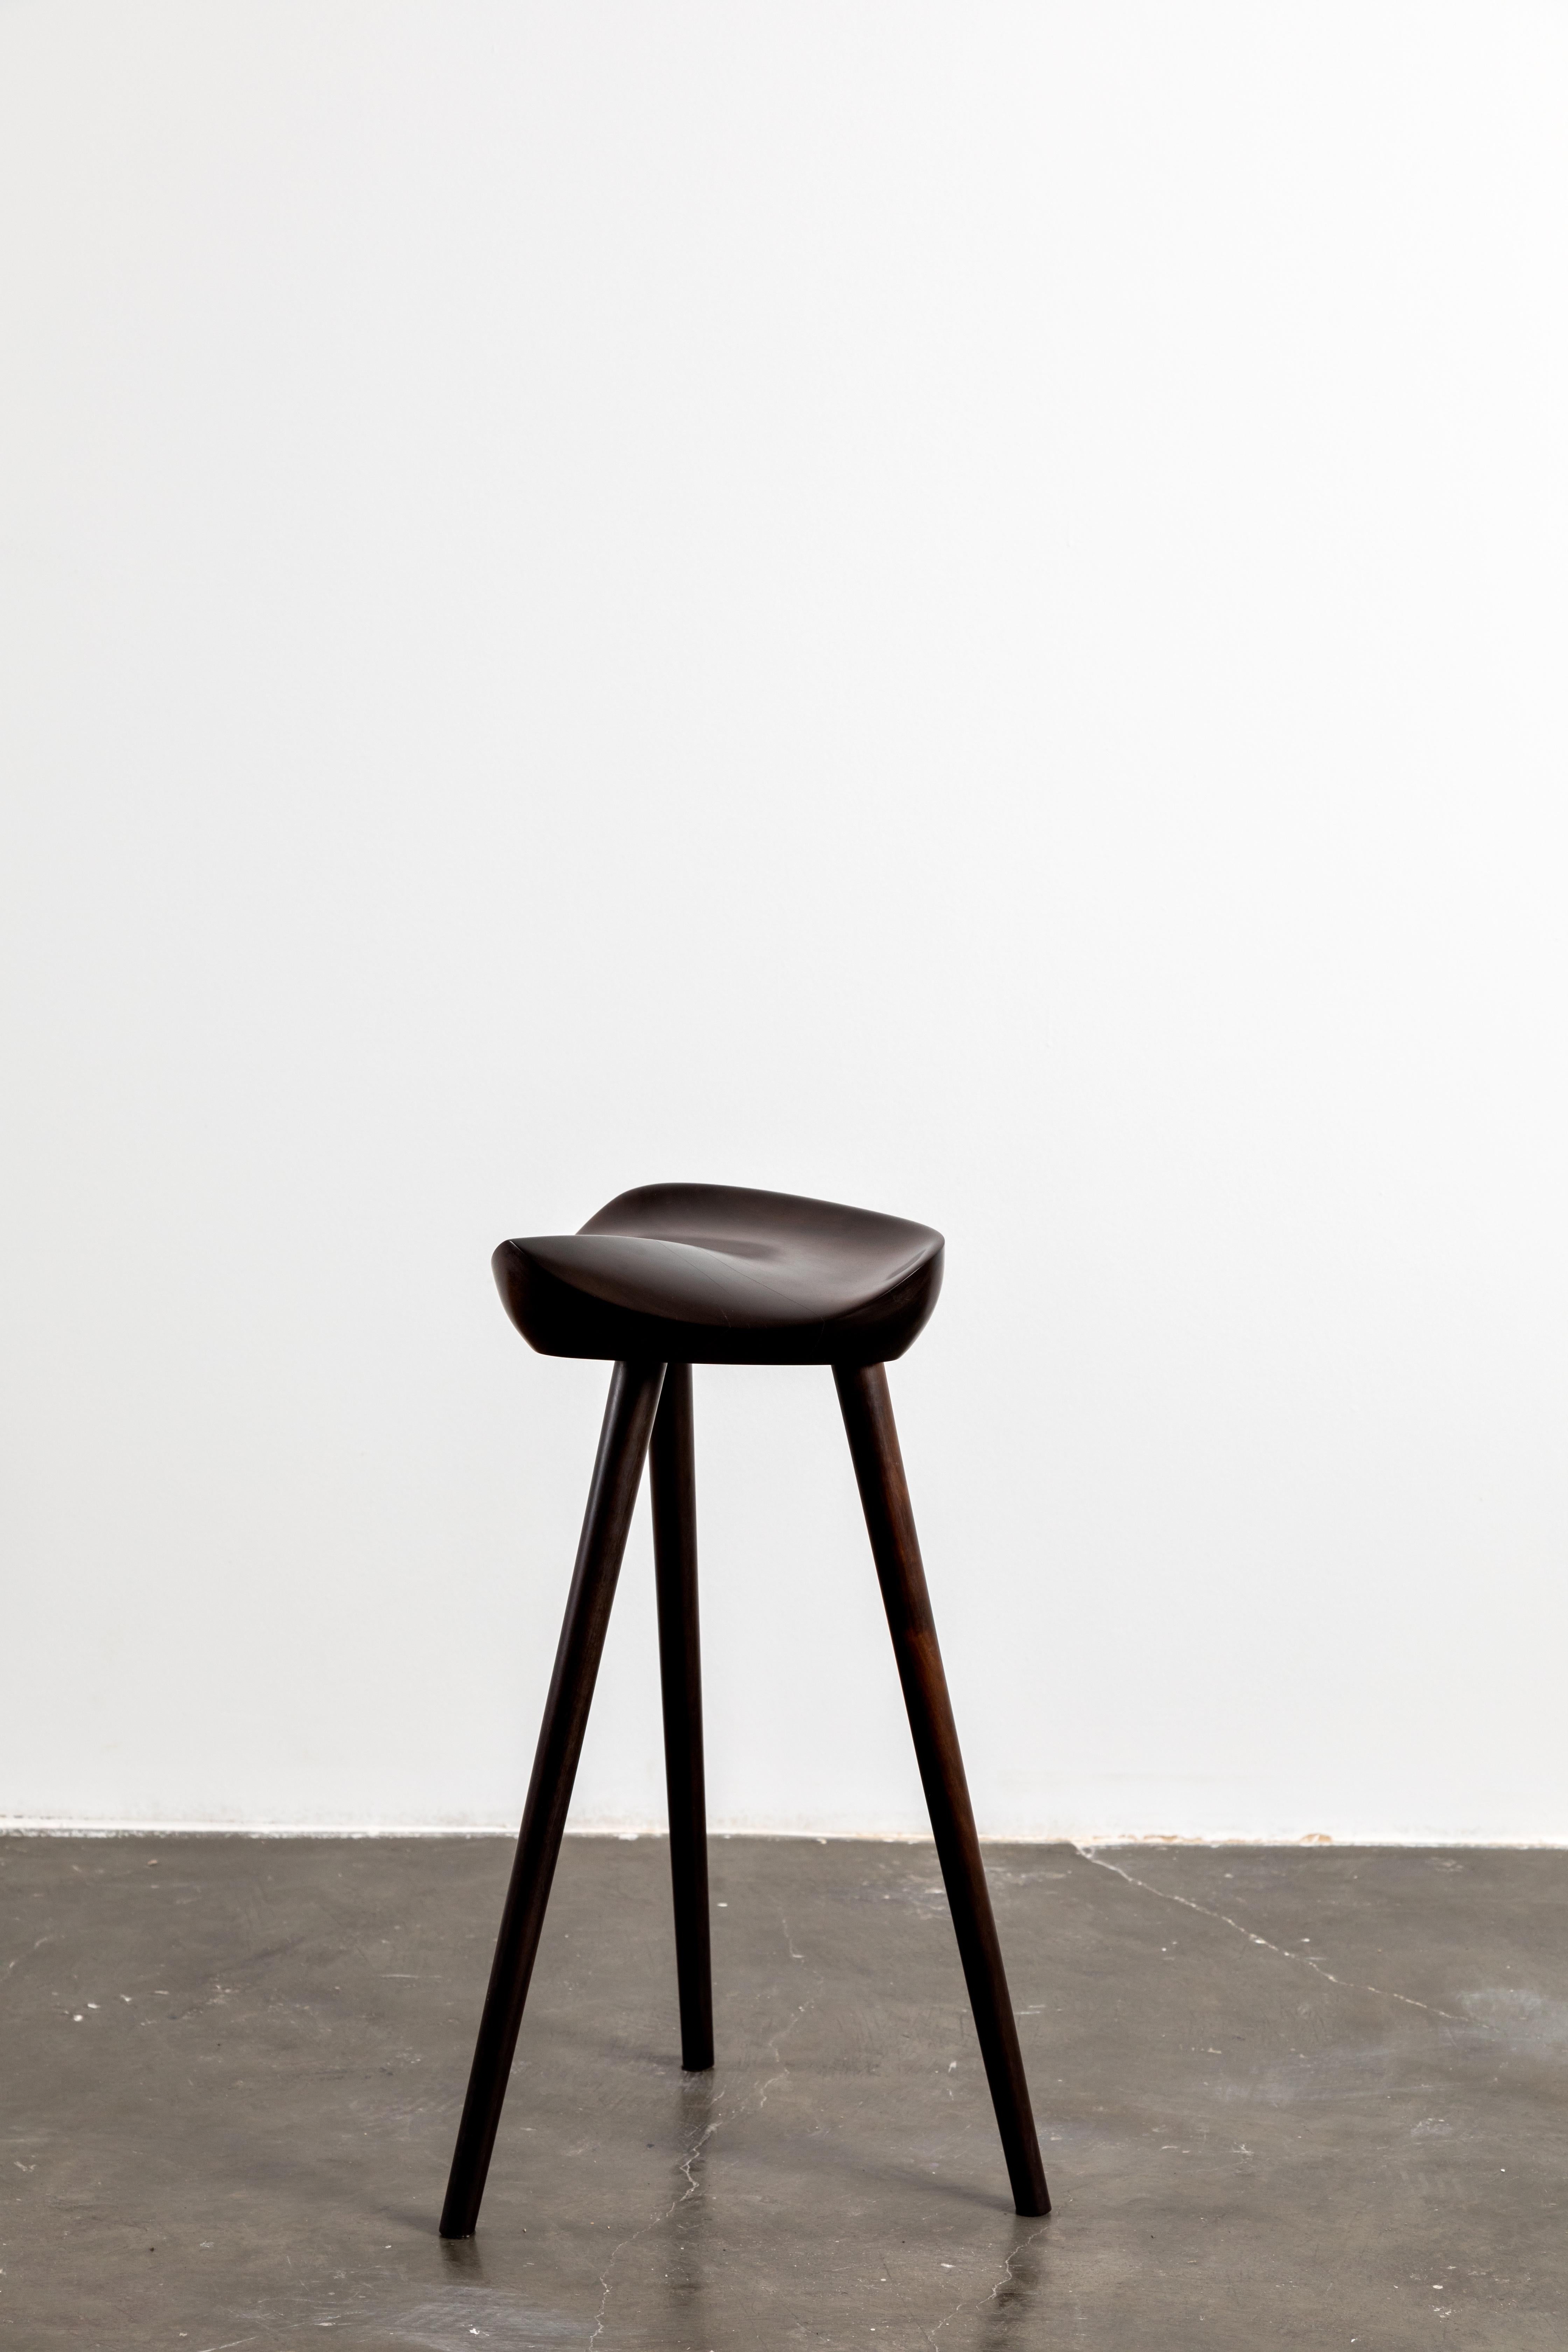 Hand-Crafted Stool in Brazilian Black Brauna Hardwood Special Edition